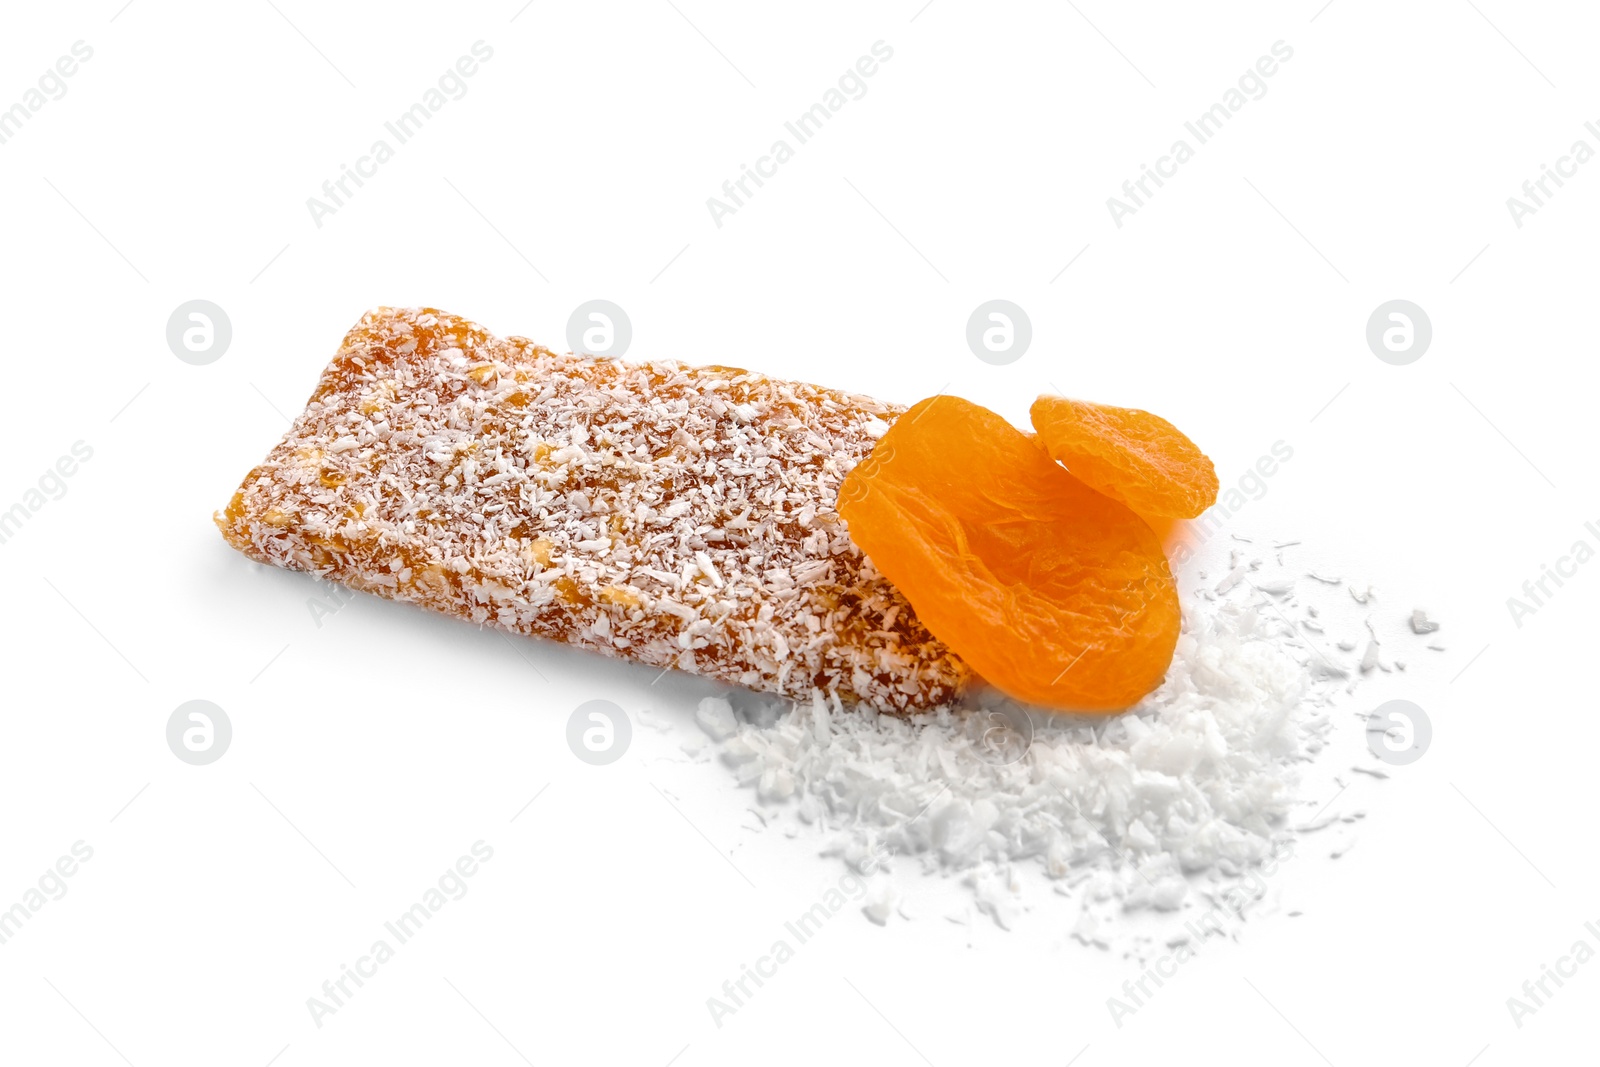 Photo of Grain cereal bar with desiccated coconut and dried apricots on white background